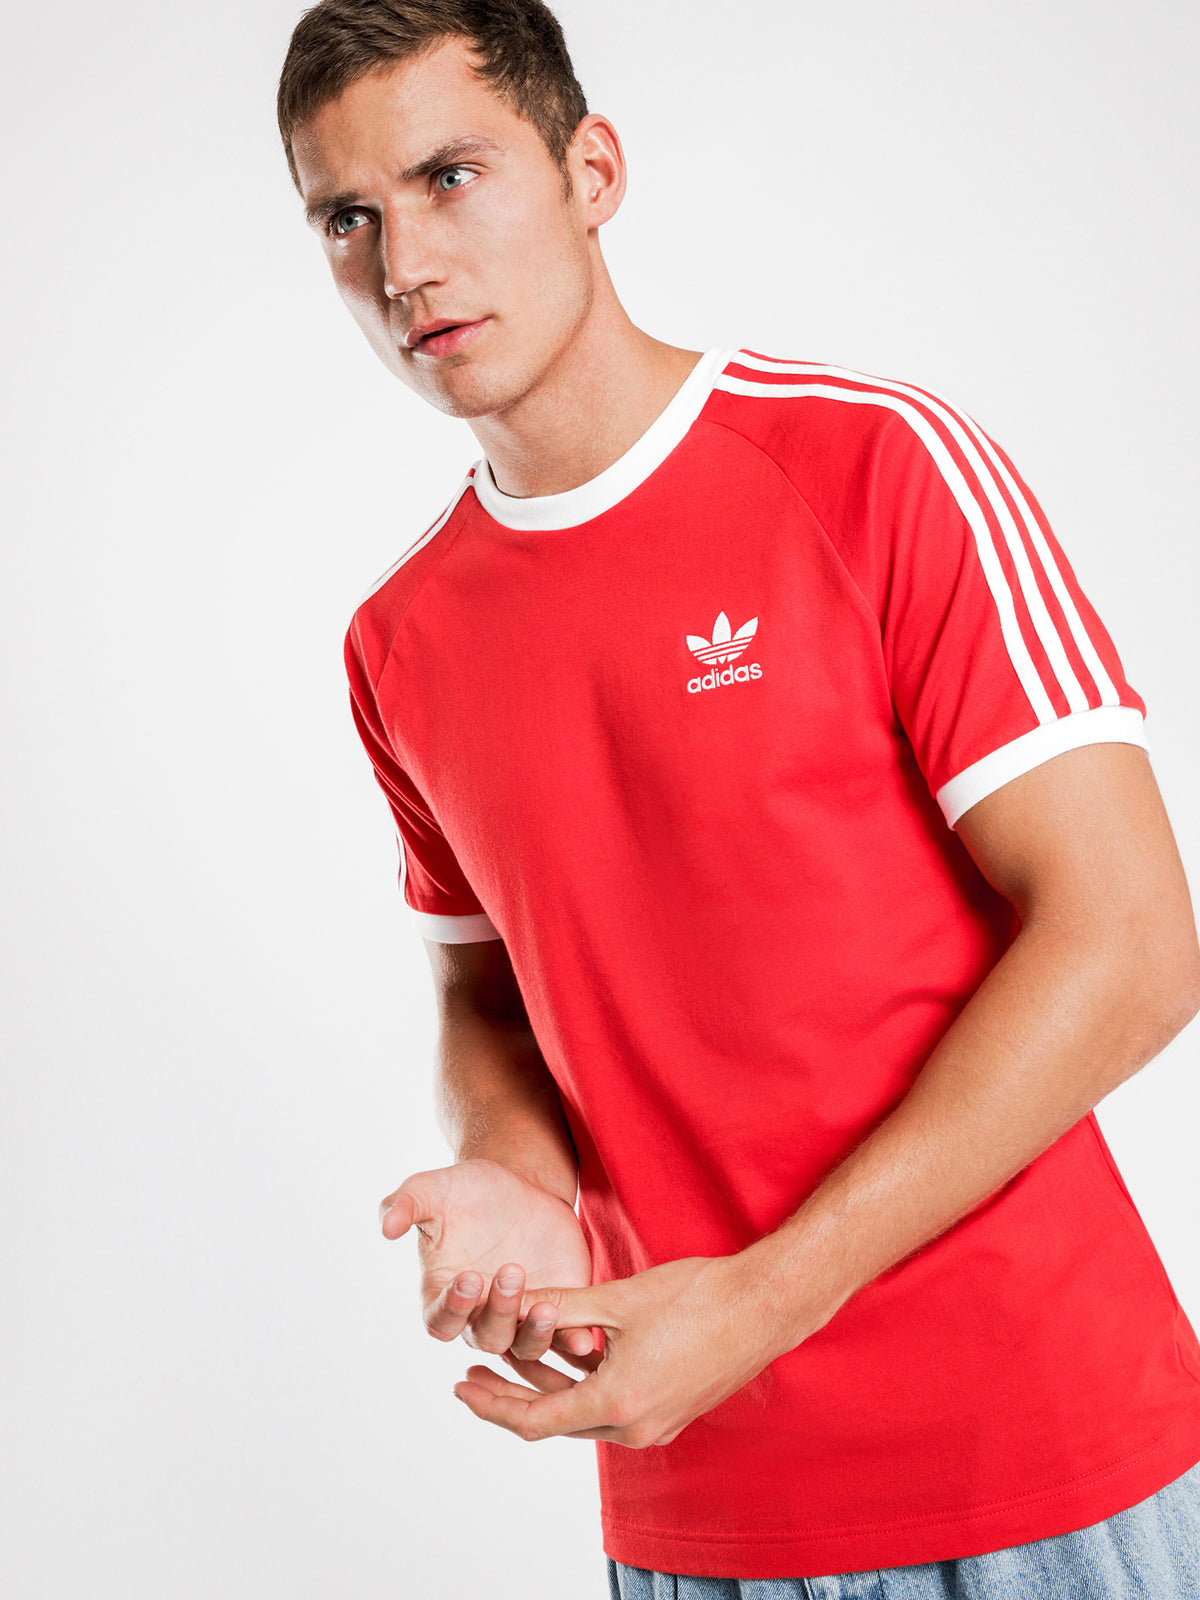 Originals 3 Stripes T-Shirt in Lush Red